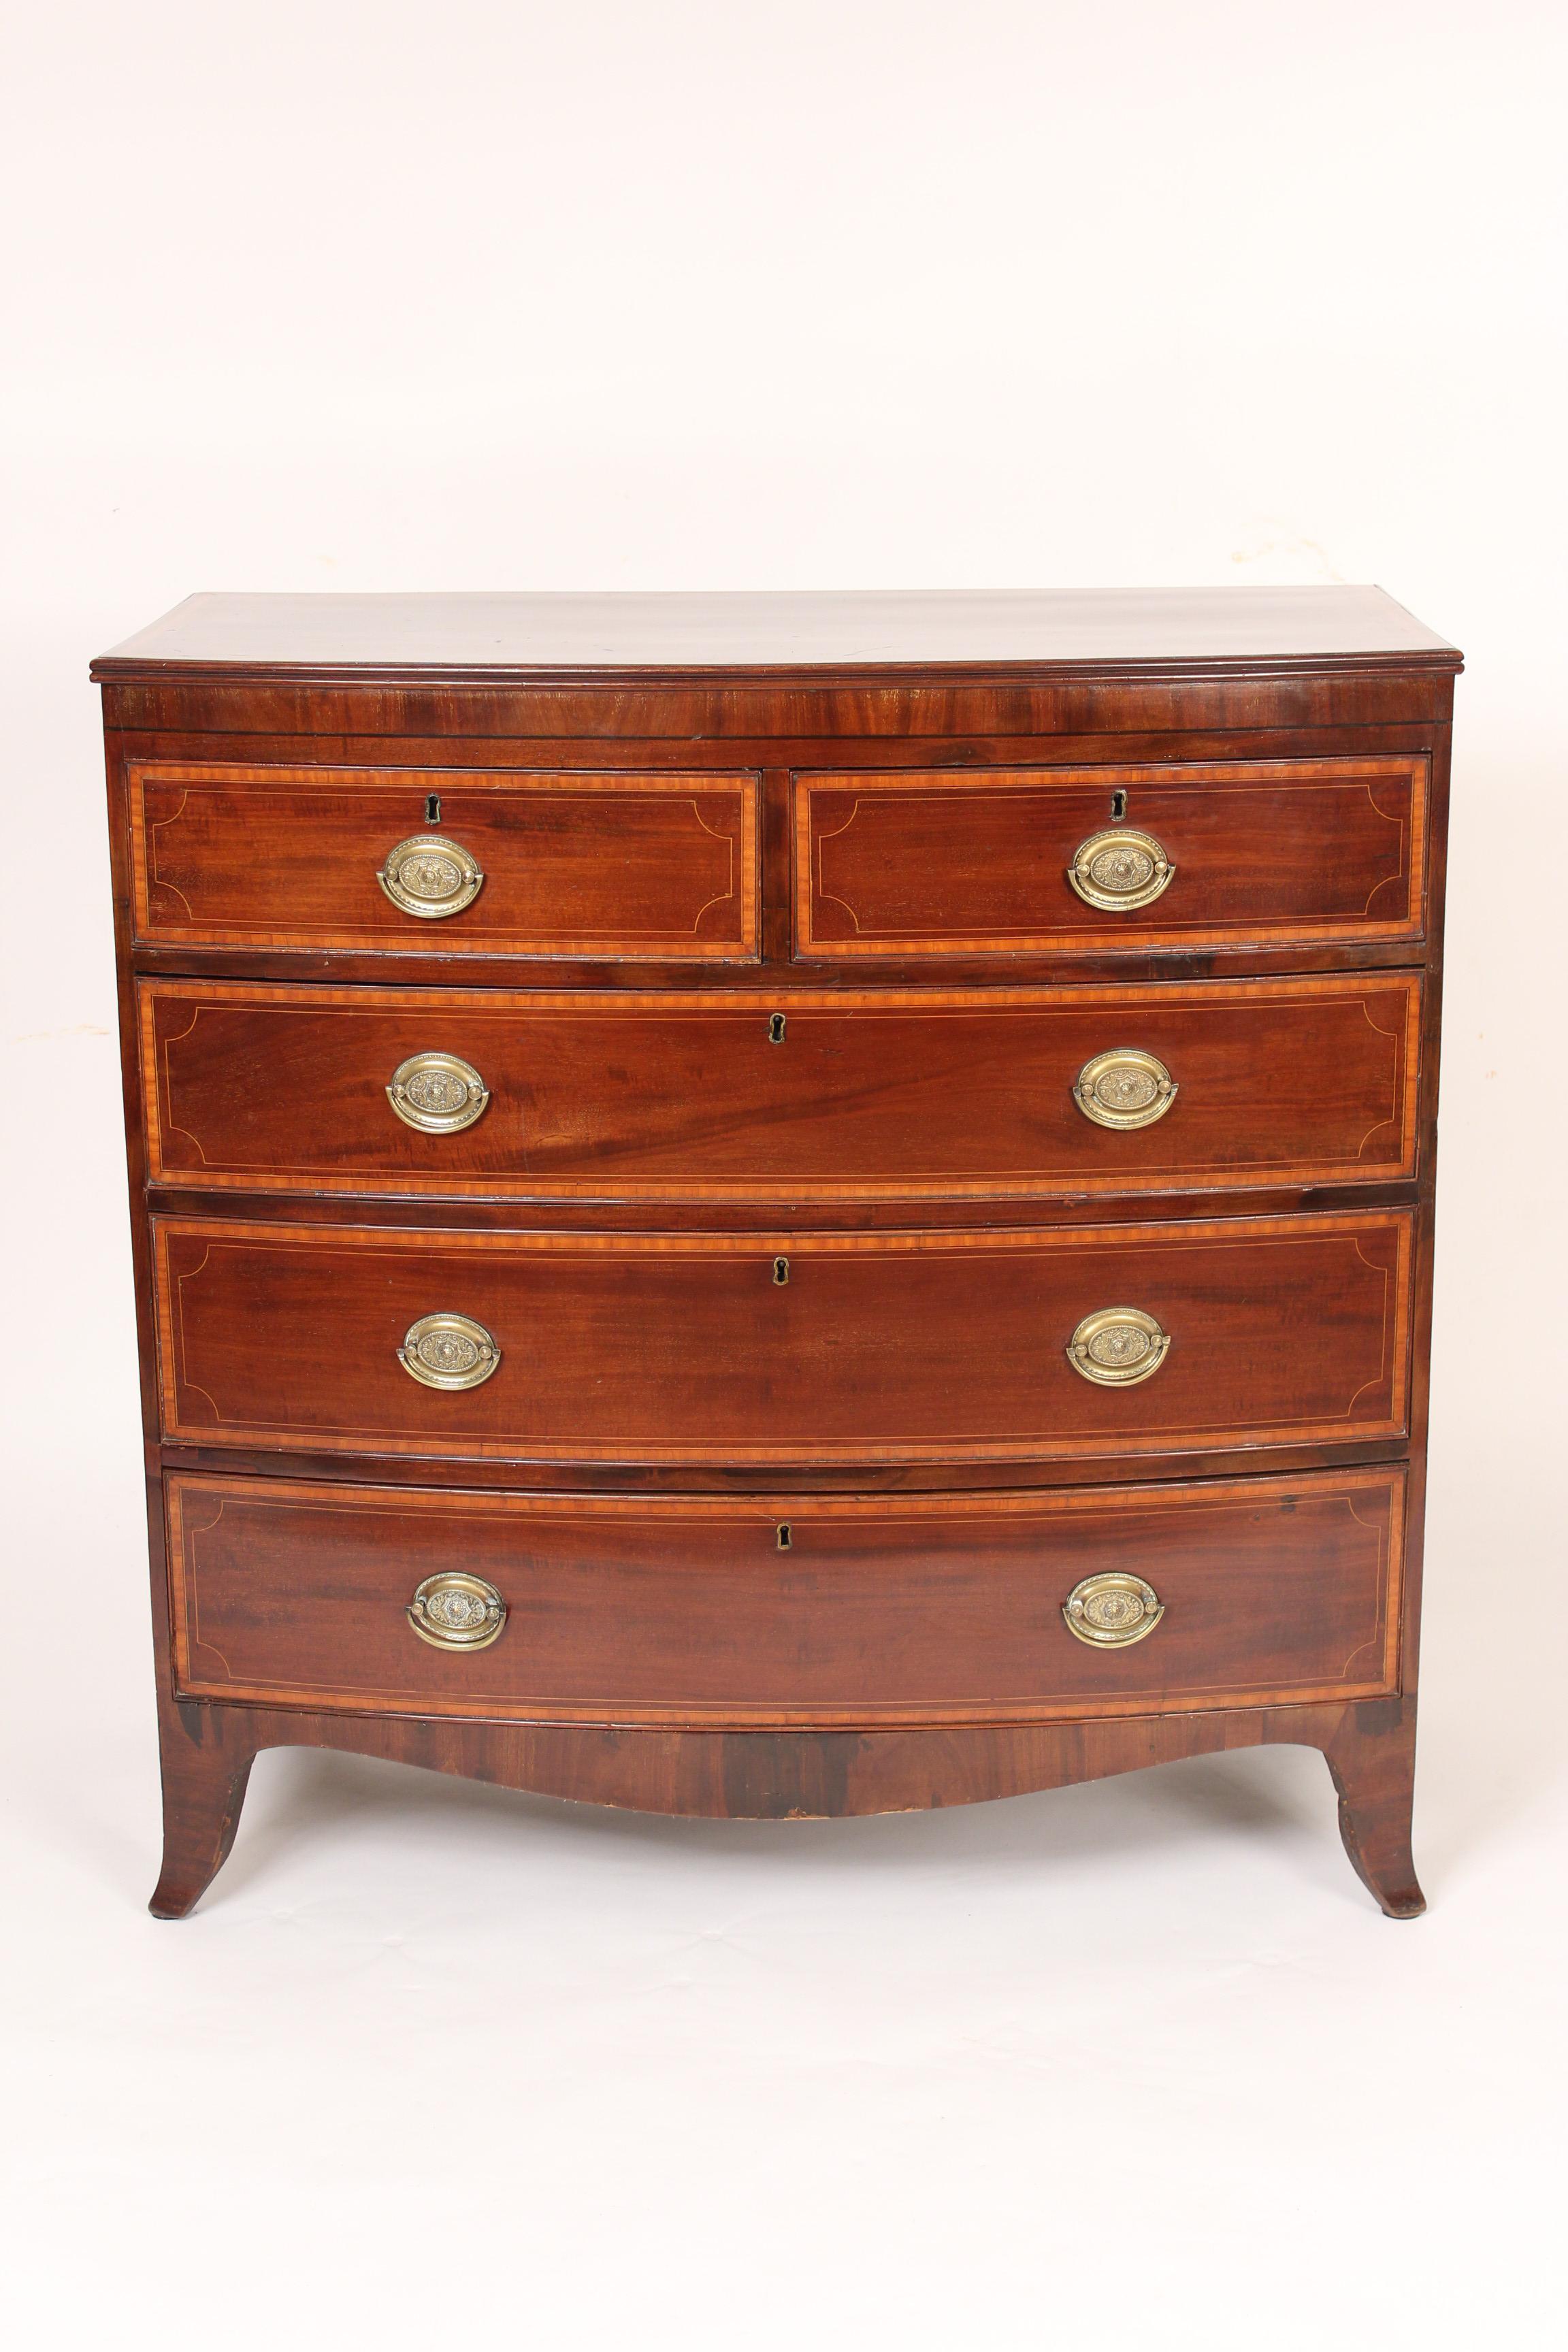 George III mahogany cross banded bow front chest of drawers, circa 1810. With satinwood cross banding on the top and drawer fronts.